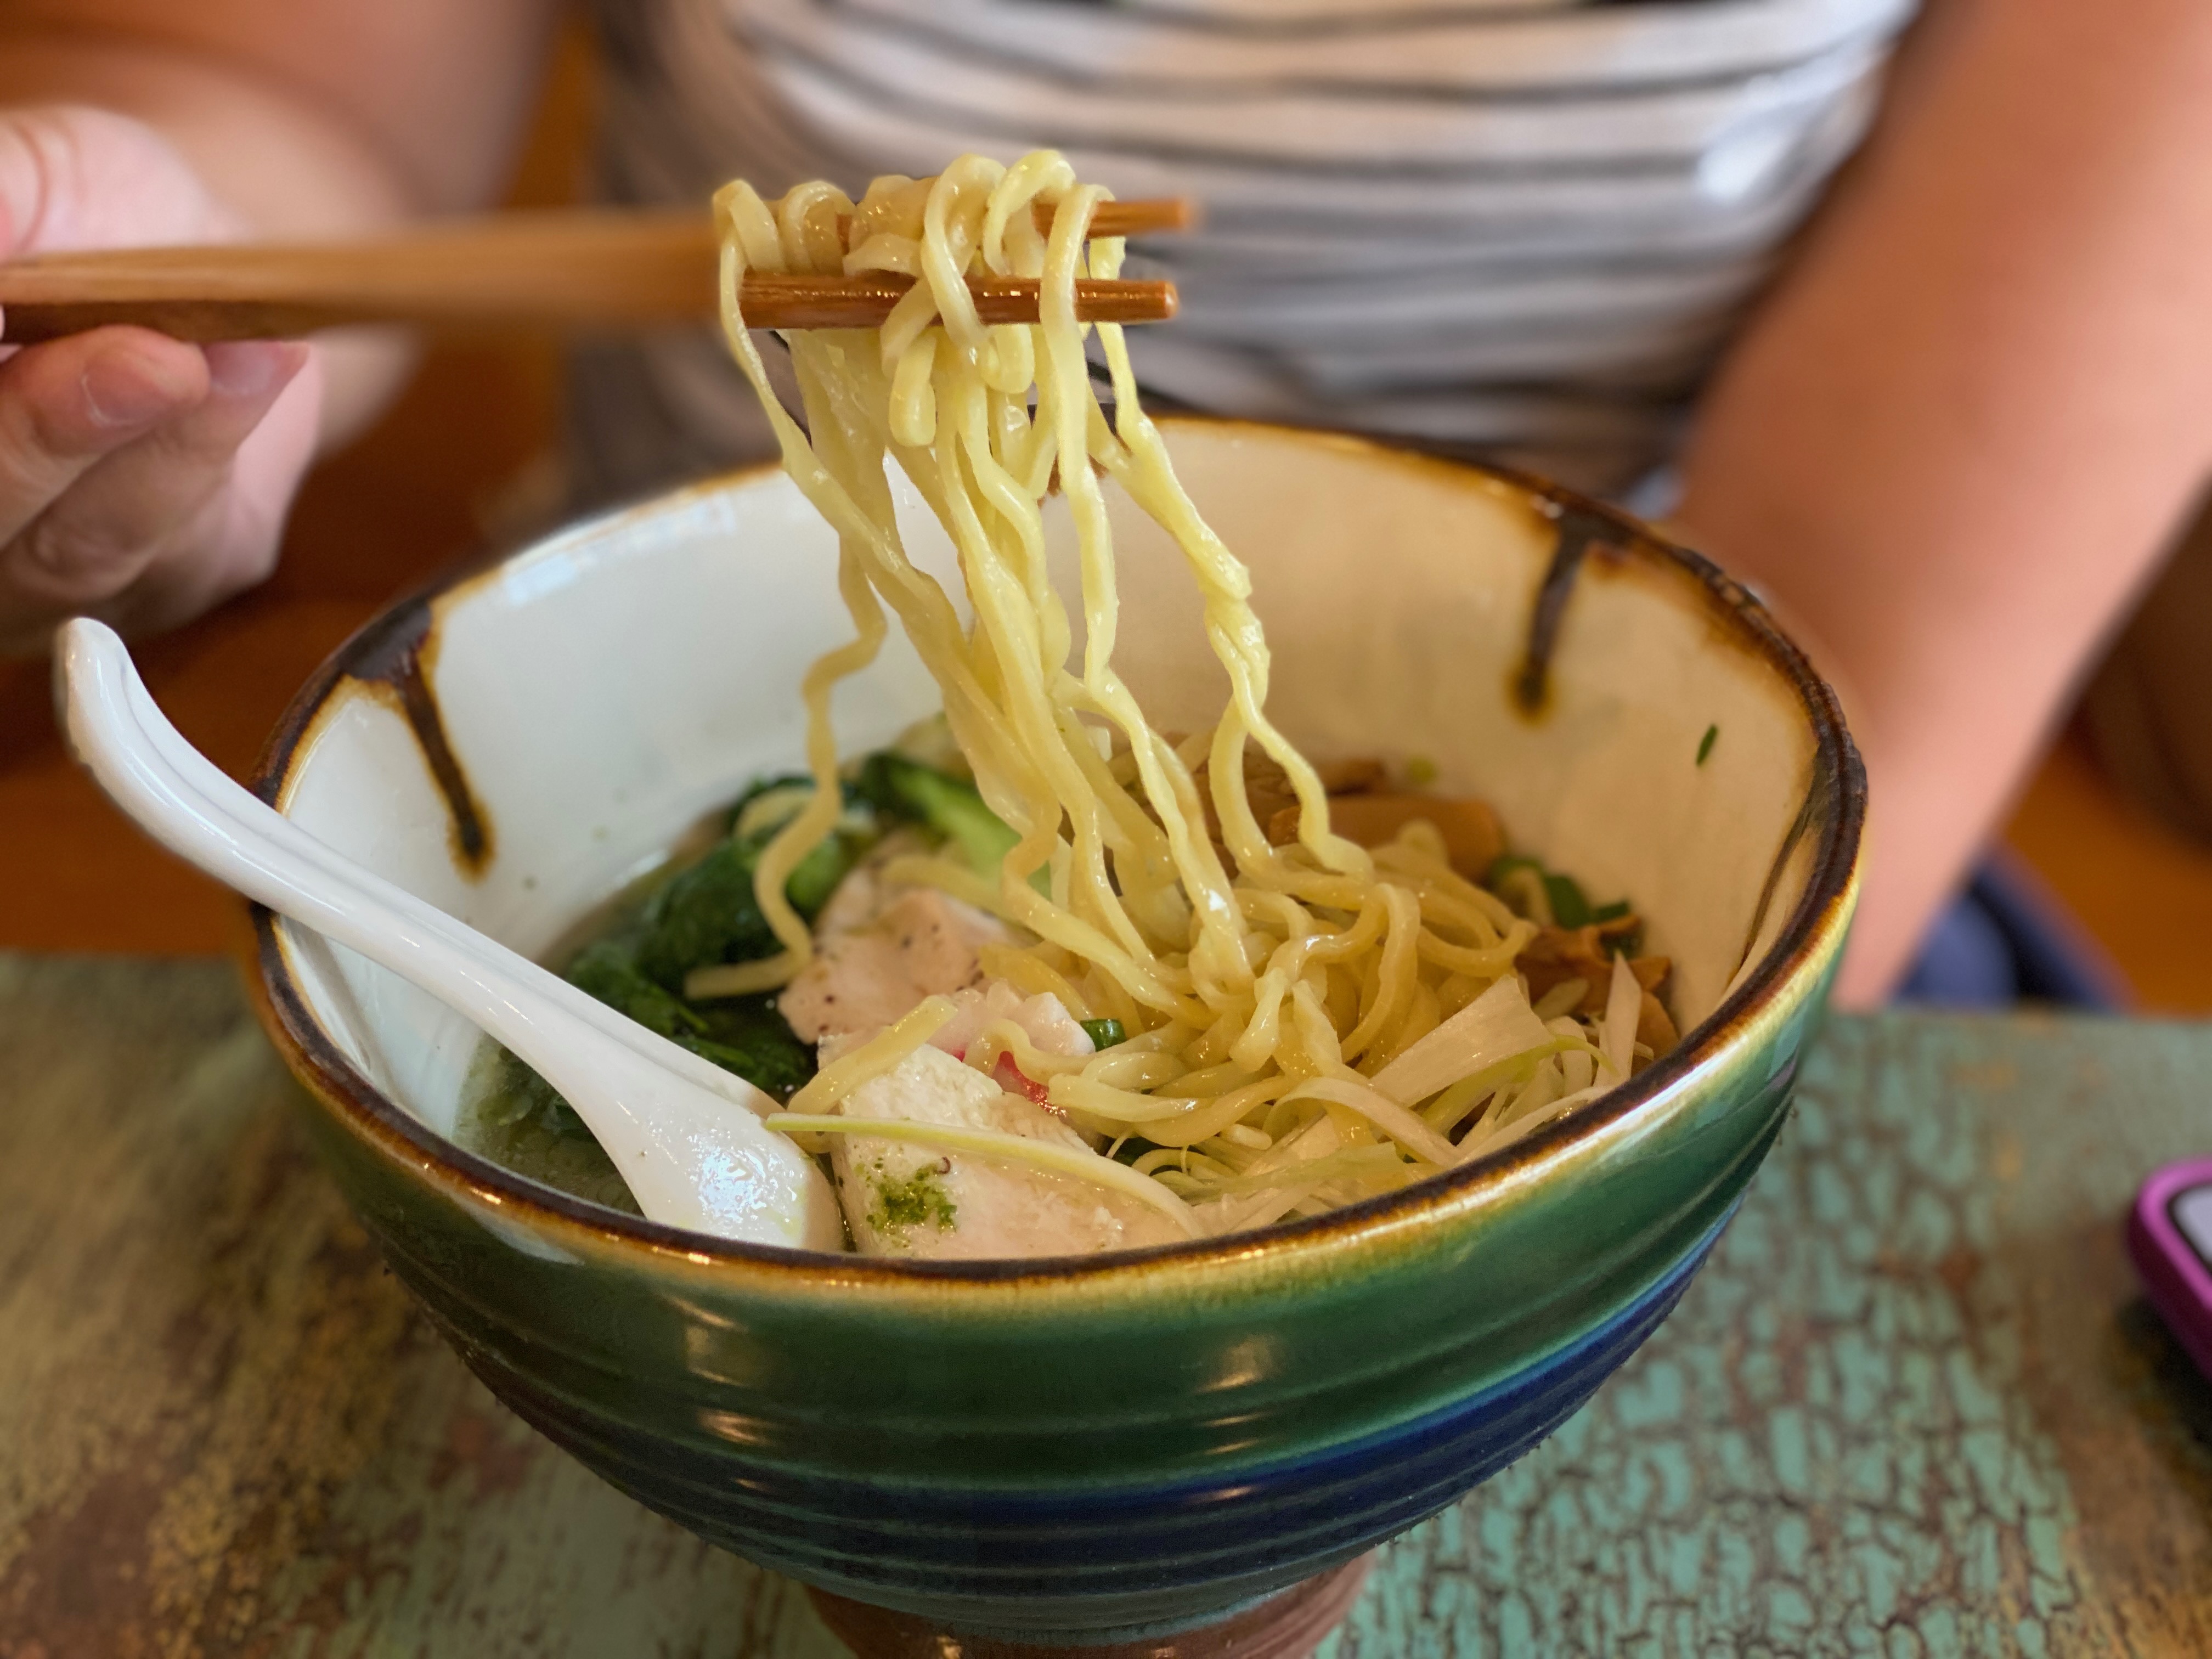 Hot in the City: Ramen get it at Manuka's newest noodle spot